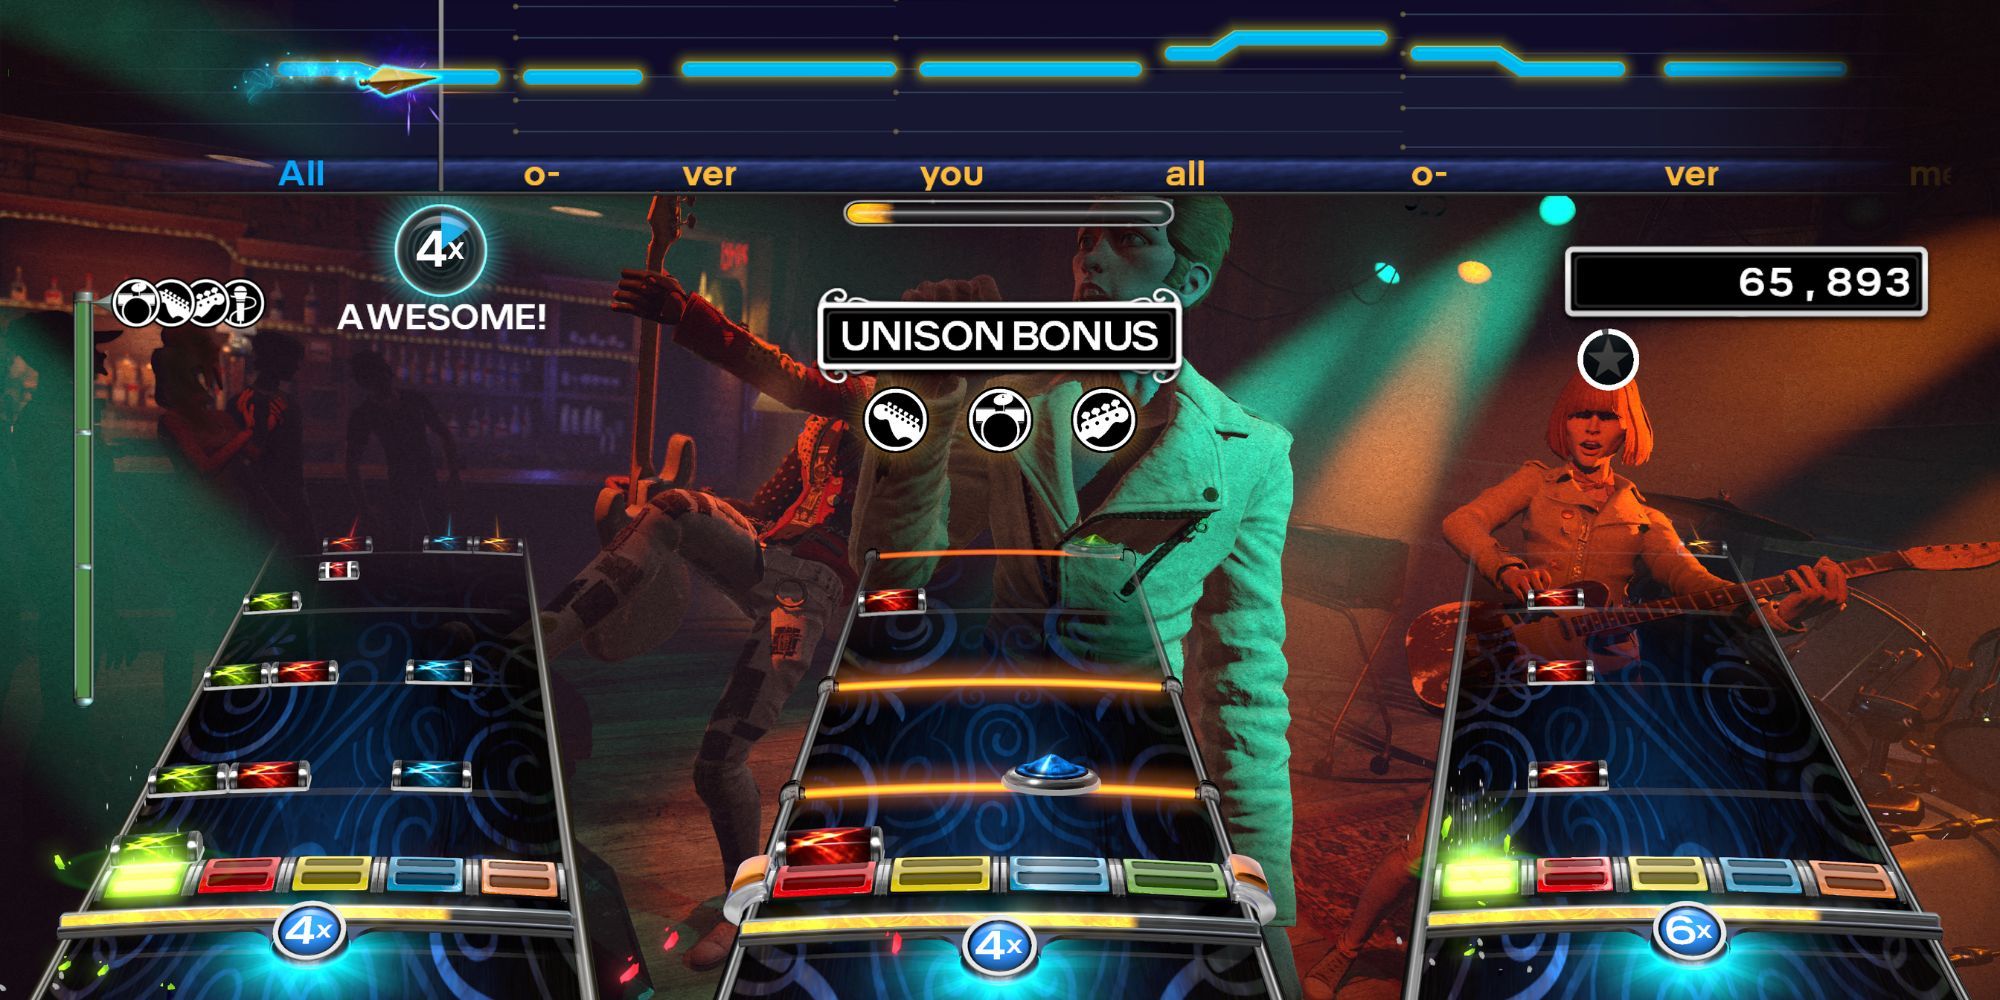 A Full Band in Rock Band 4, showing colorful guitarist, bassist, drummer, and singer note sequences.